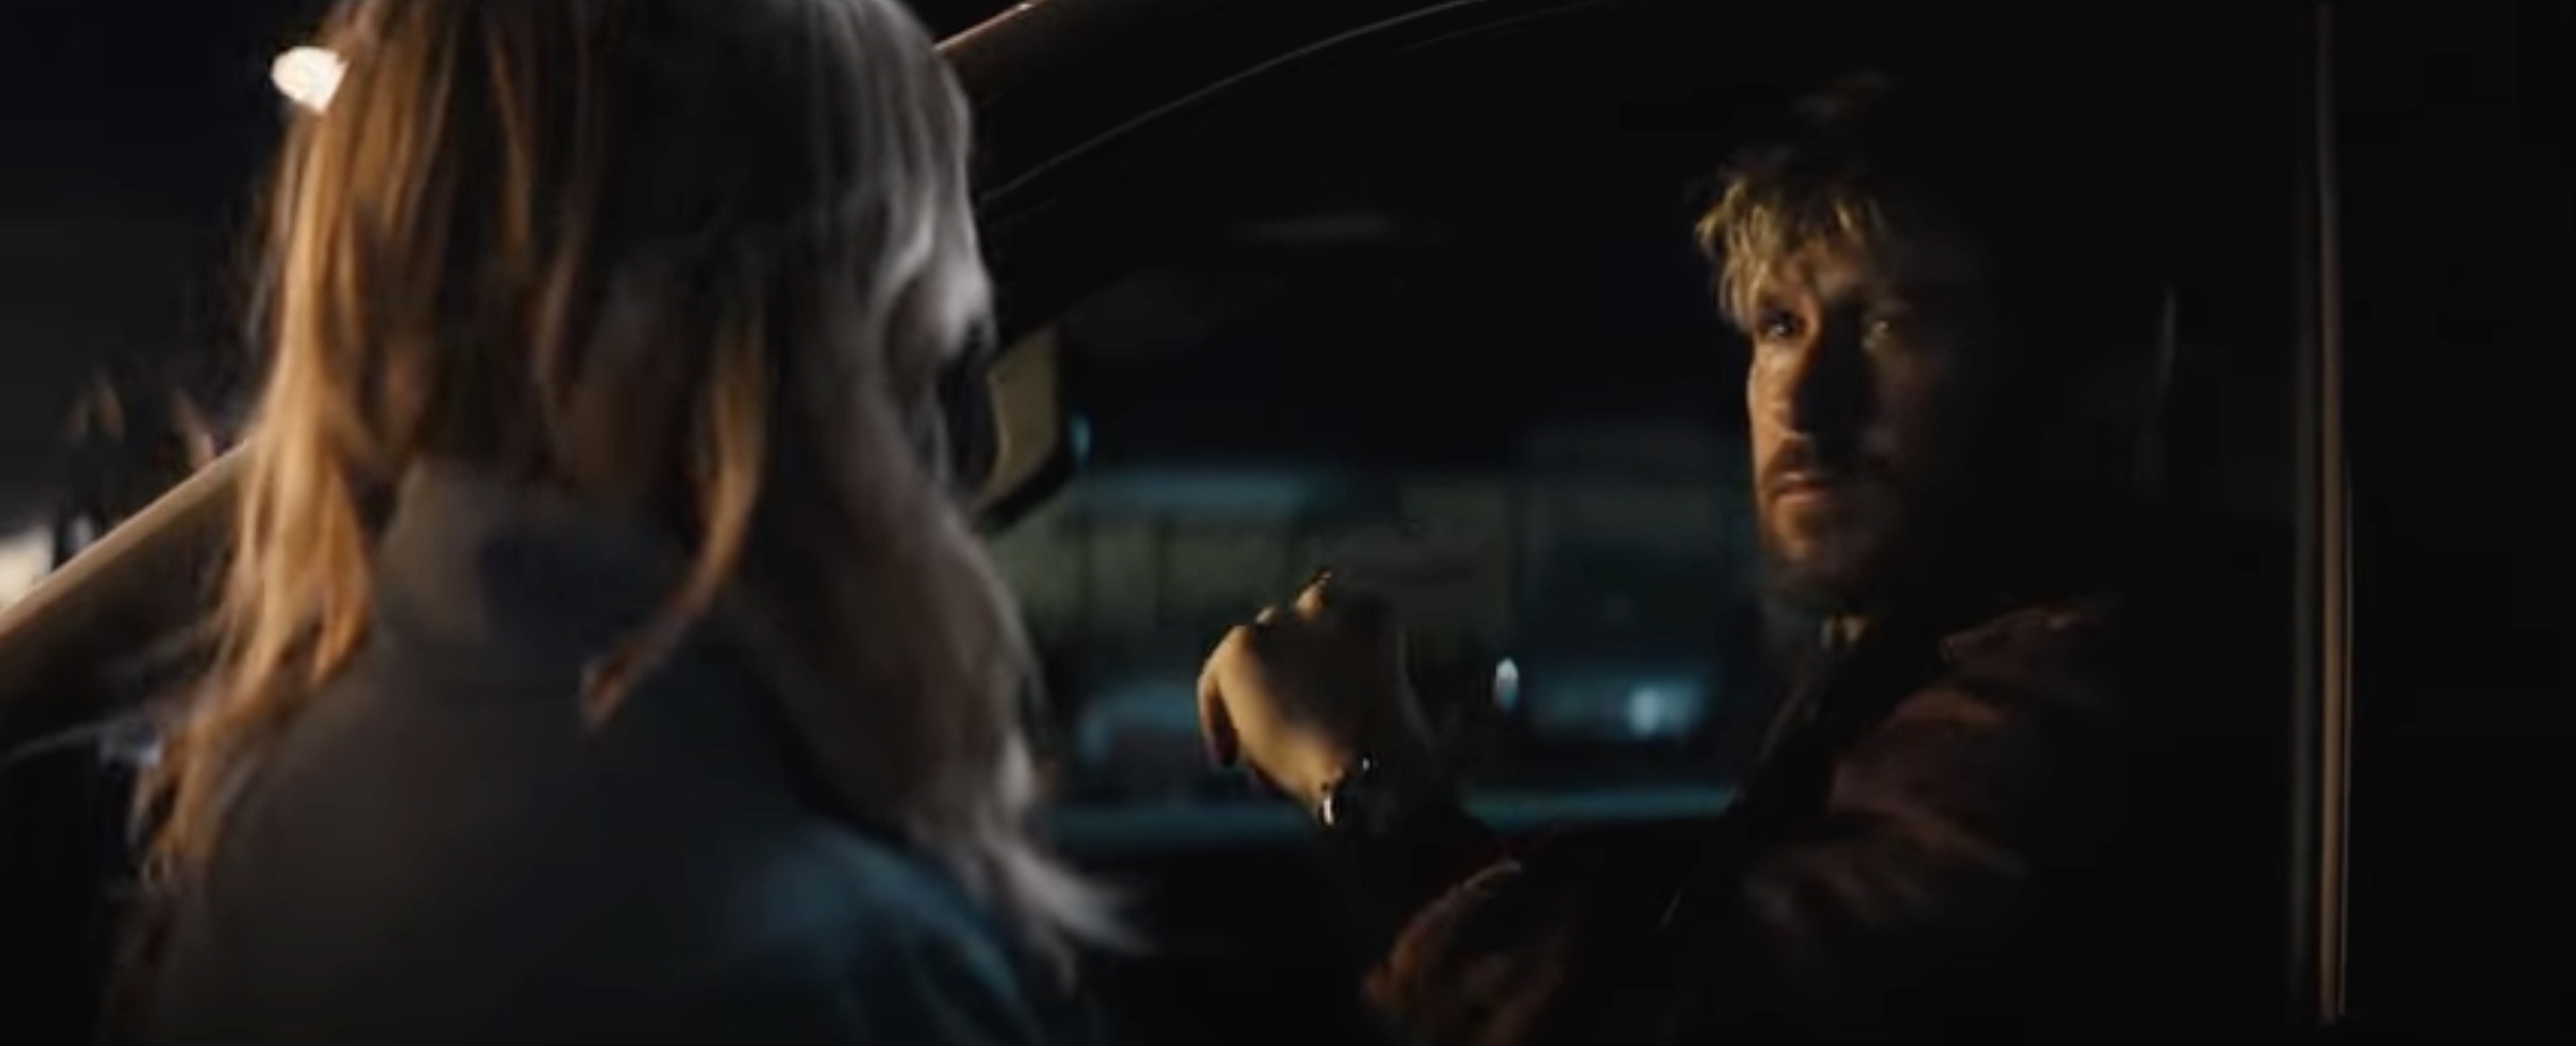 A scene from the trailer for the Ryan Gosling/Emily Blunt movie "The Fall Guy," based on the '80s TV series starring Lee Majors. It opens in theaters May 3.